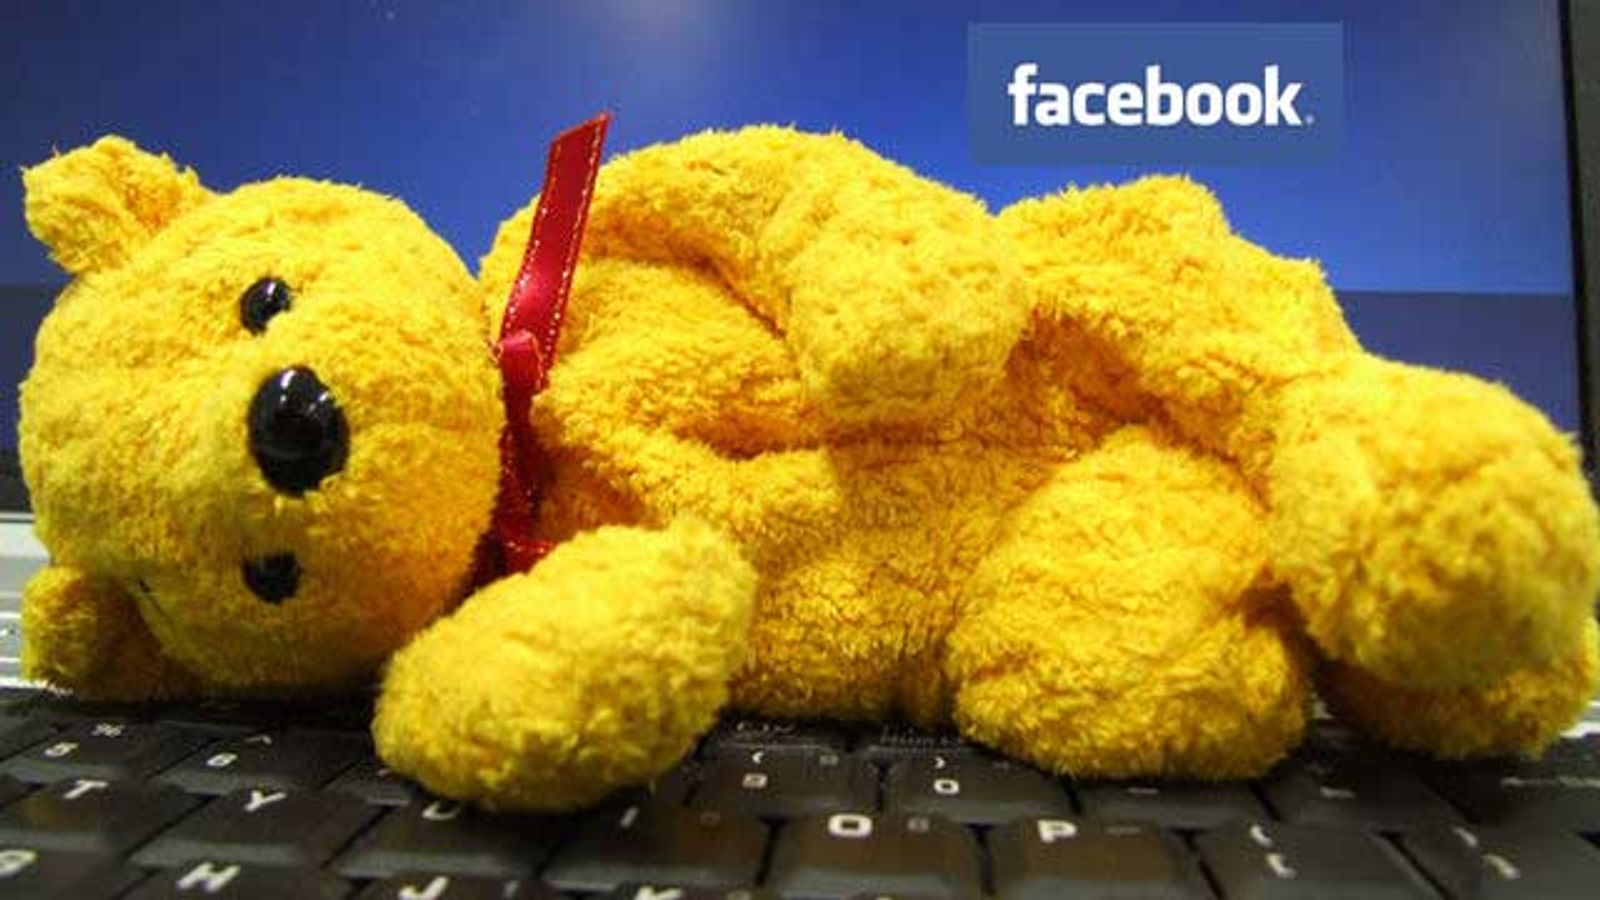 Six-Year-Old CP Video Wreaks Havoc on Facebook